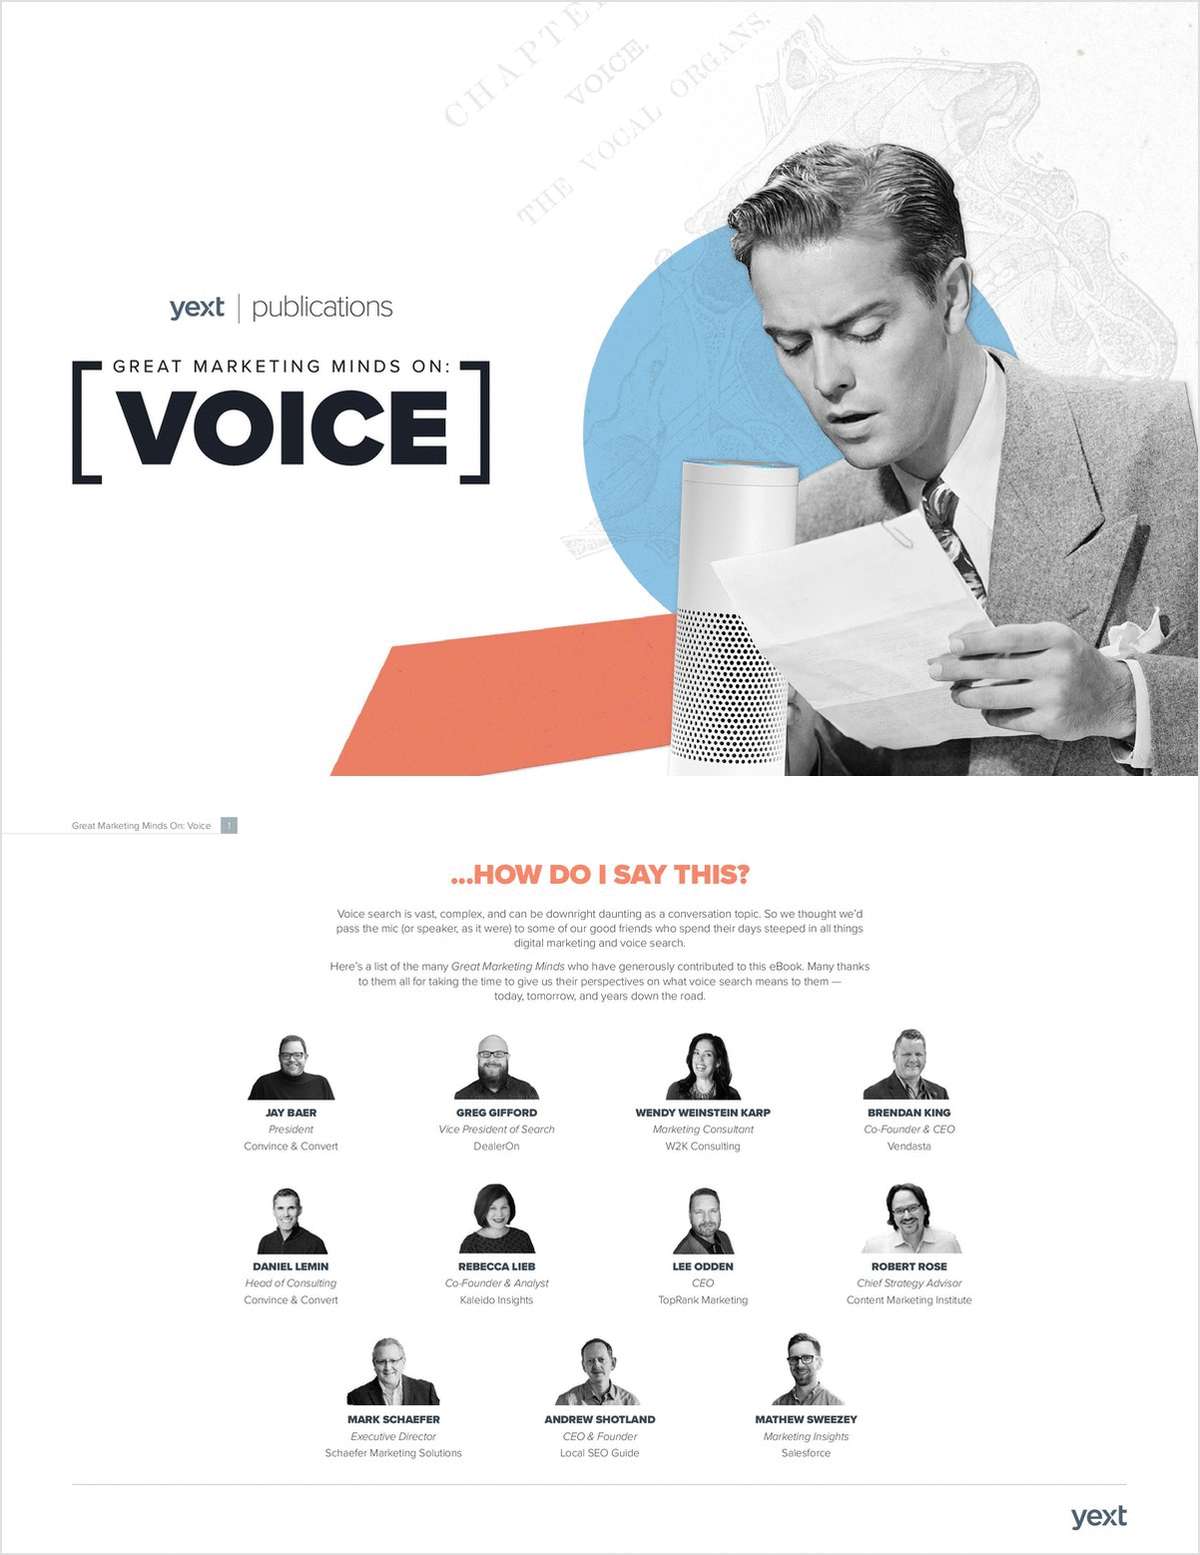 Great Marketing Minds On: Voice